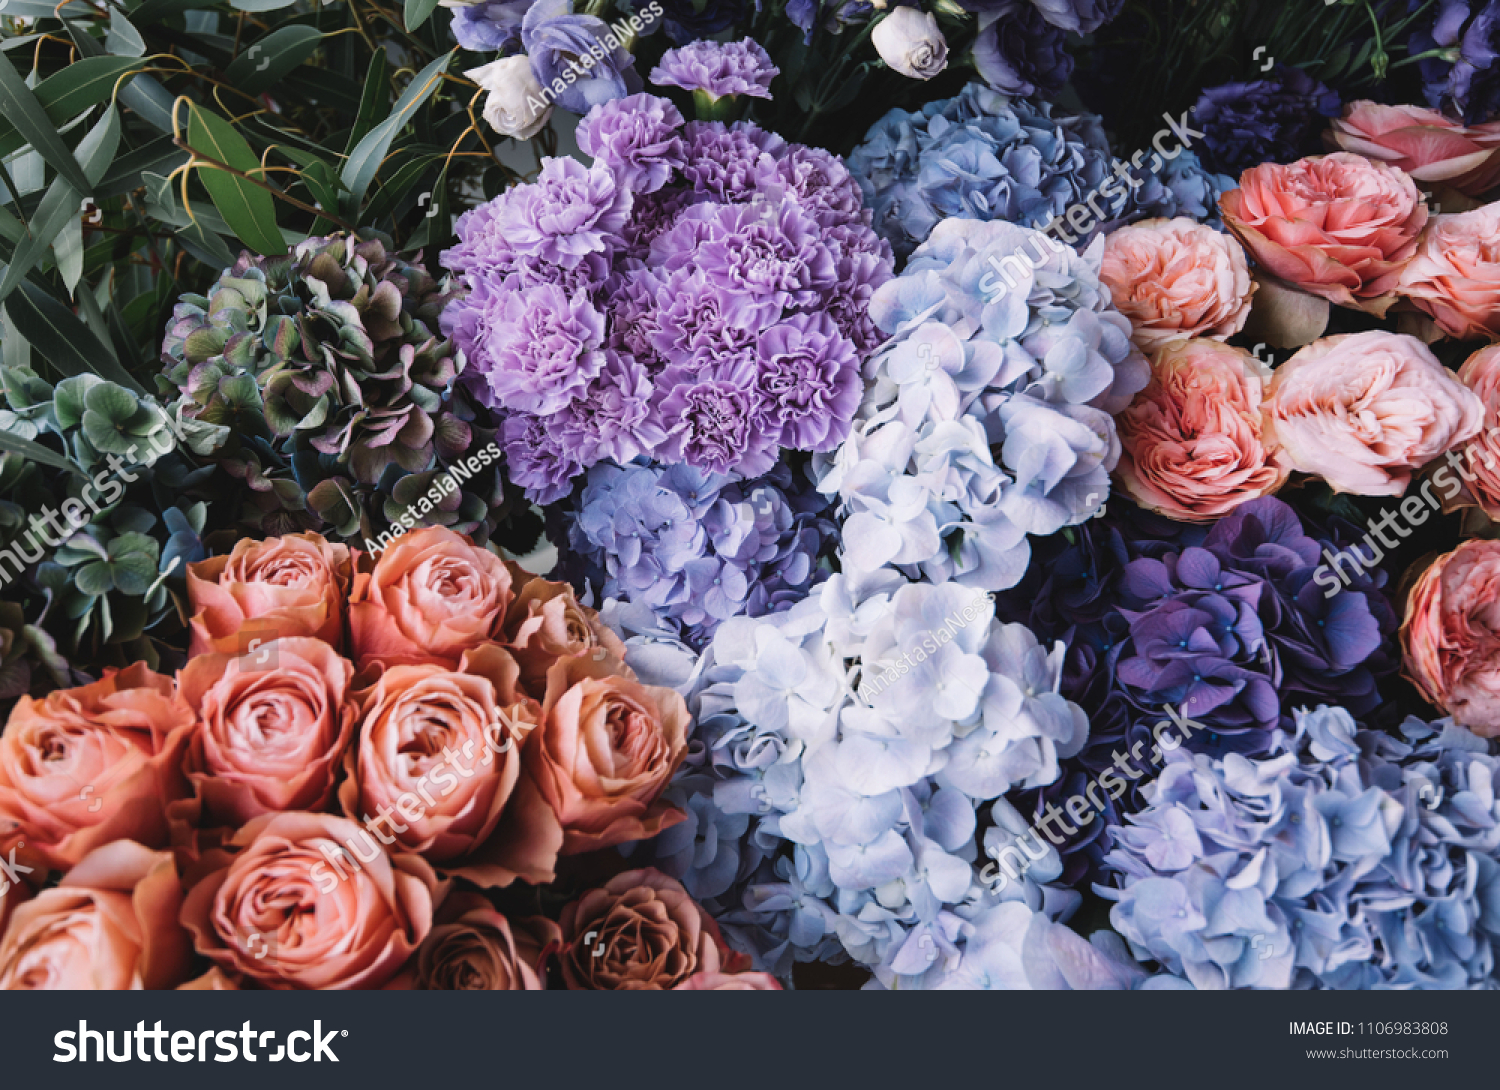 Beautiful blossoming flowers (roses, hydrangeas, carnations, eustoma) in blu, antique blue and peach colours at the florist shop #1106983808